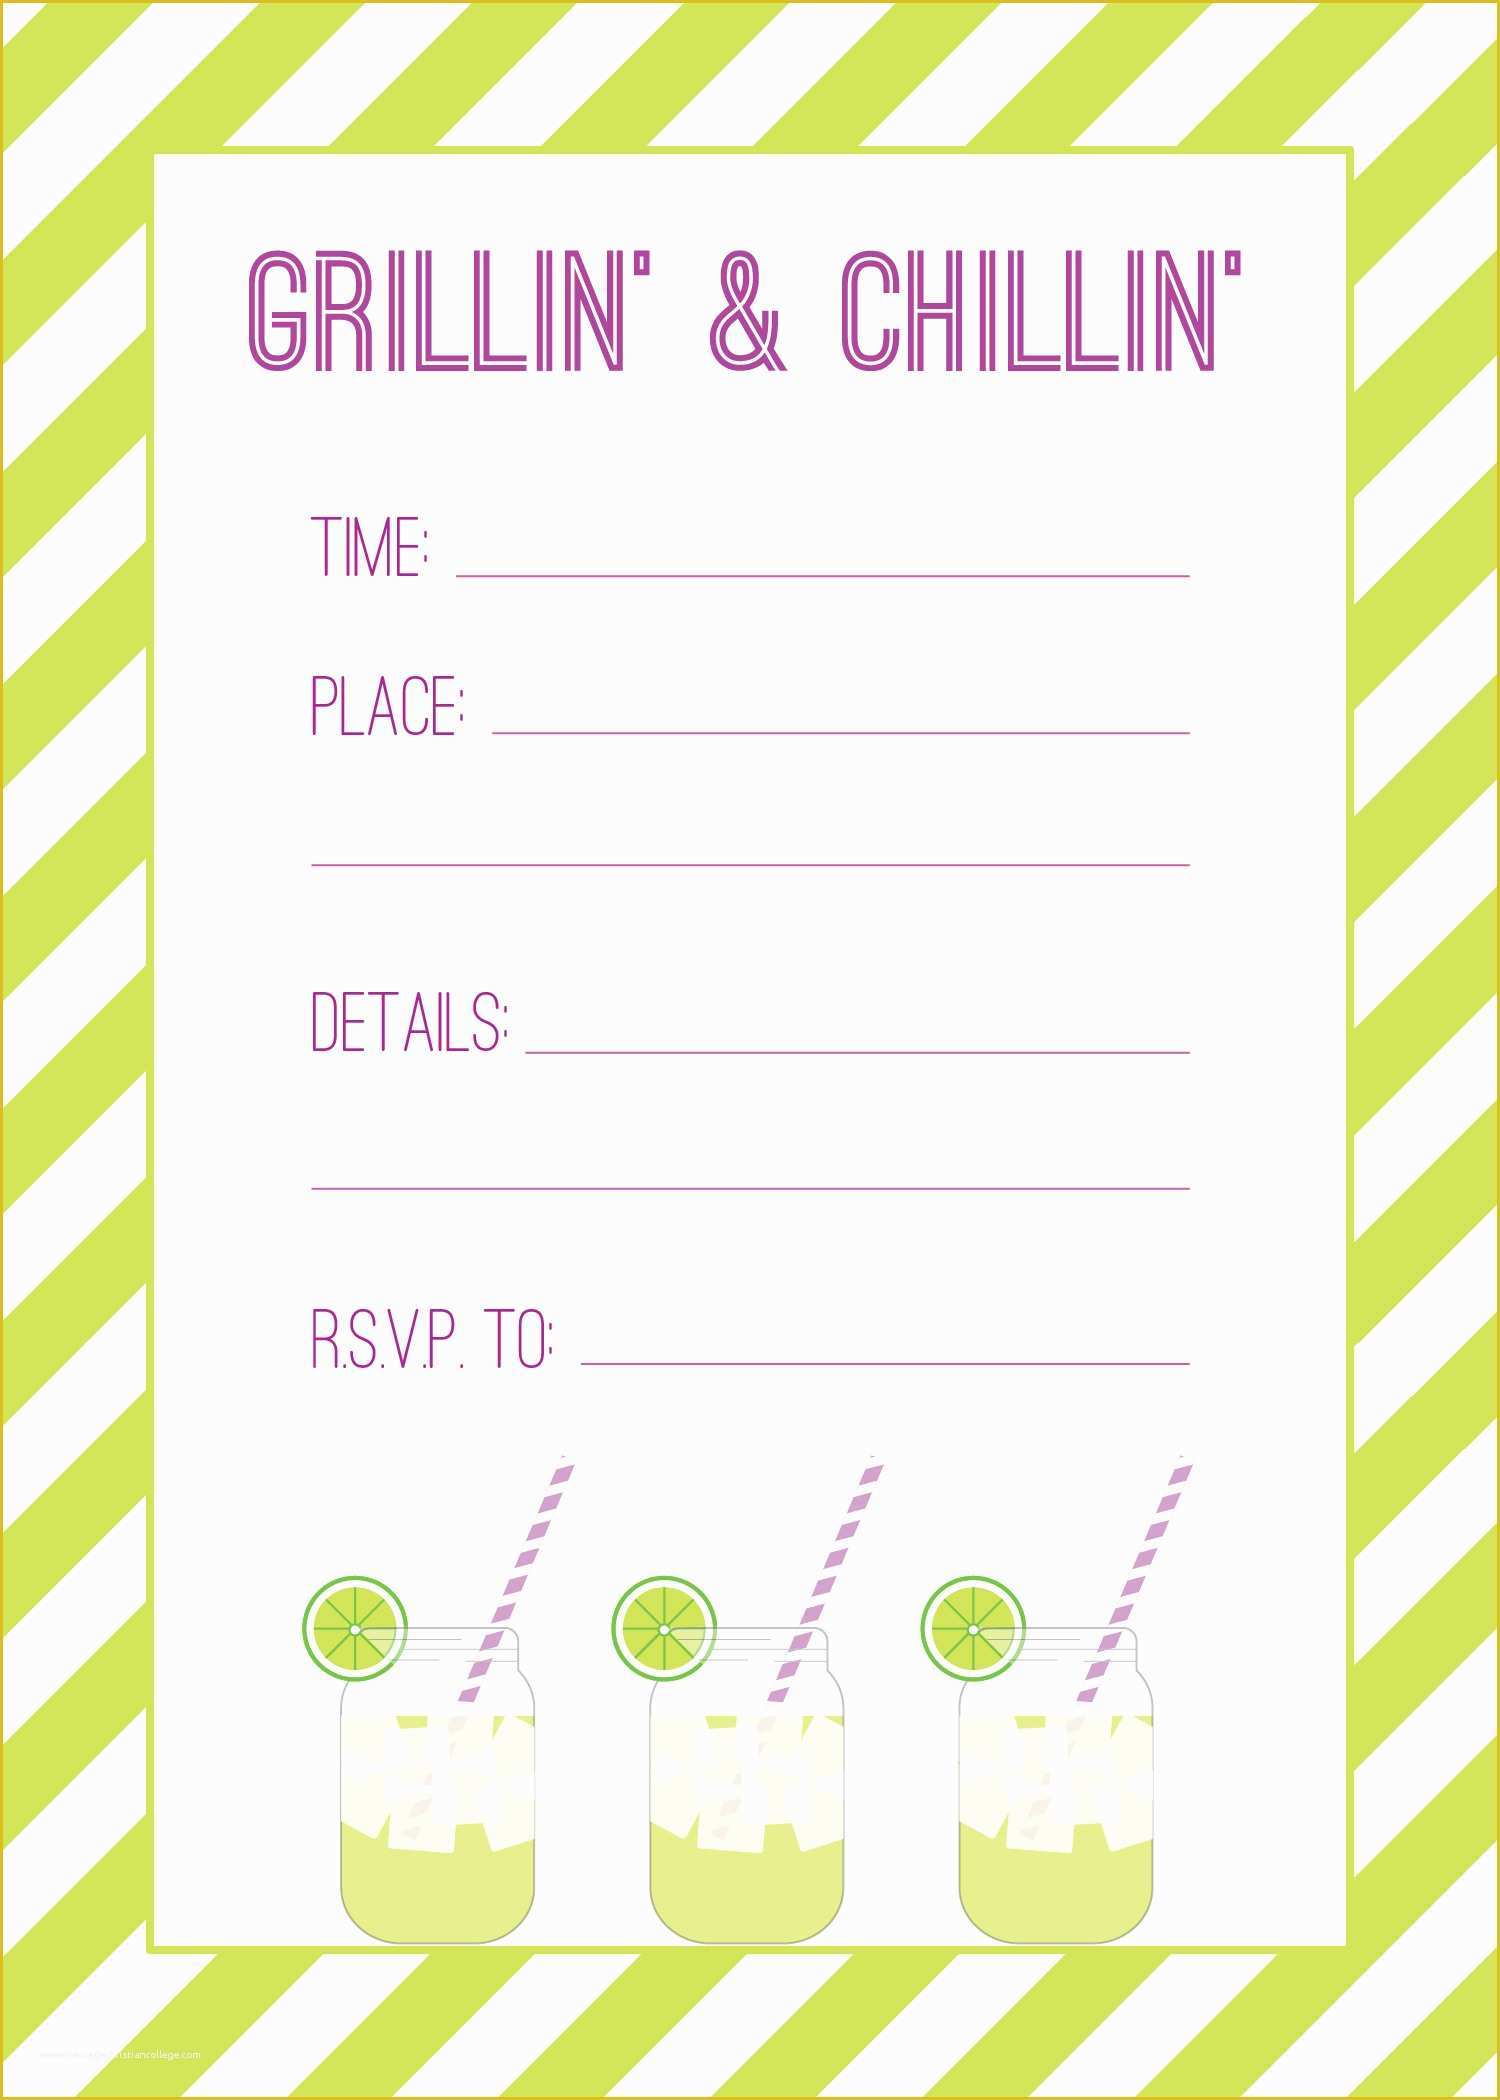 Free Printable Birthday Invitation Cards Templates Of Grillin’ &amp; Chillin’ – Free Printable Cook Out Invitations